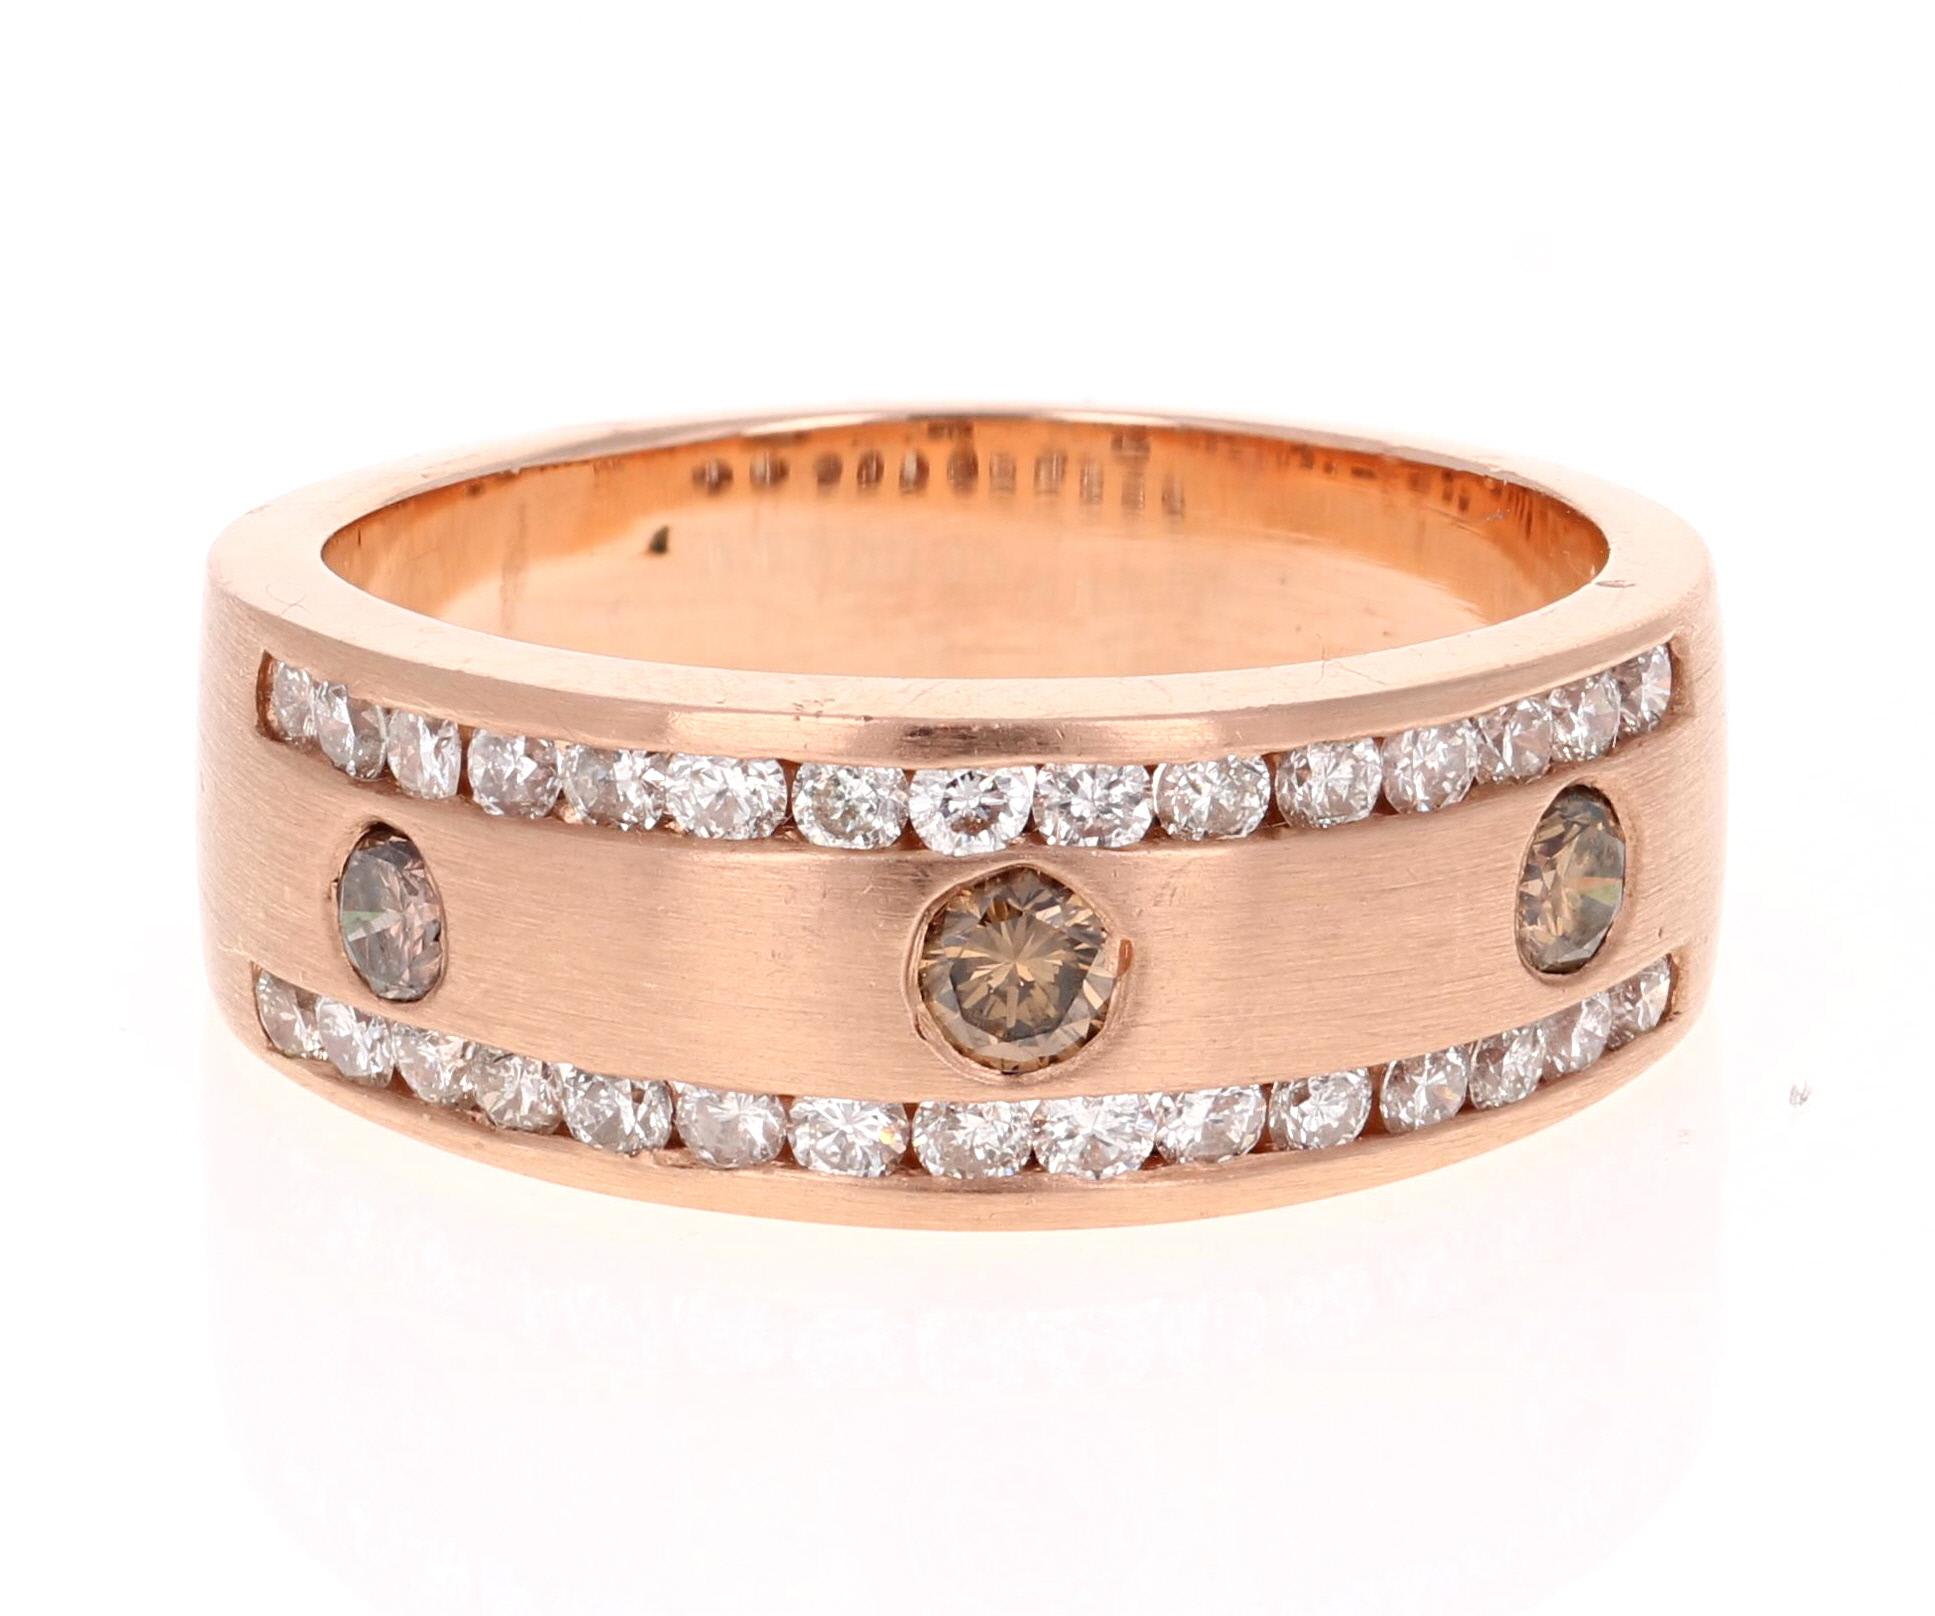 We have a Men's Fine Jewelry Collection as well! One stop shop for all your jewels! 
Calling this band unique is simply an understatement!
This ring is a magnificent and masculine Men's Champagne Diamond Band. It has 3 Round Cut Champagne Colored